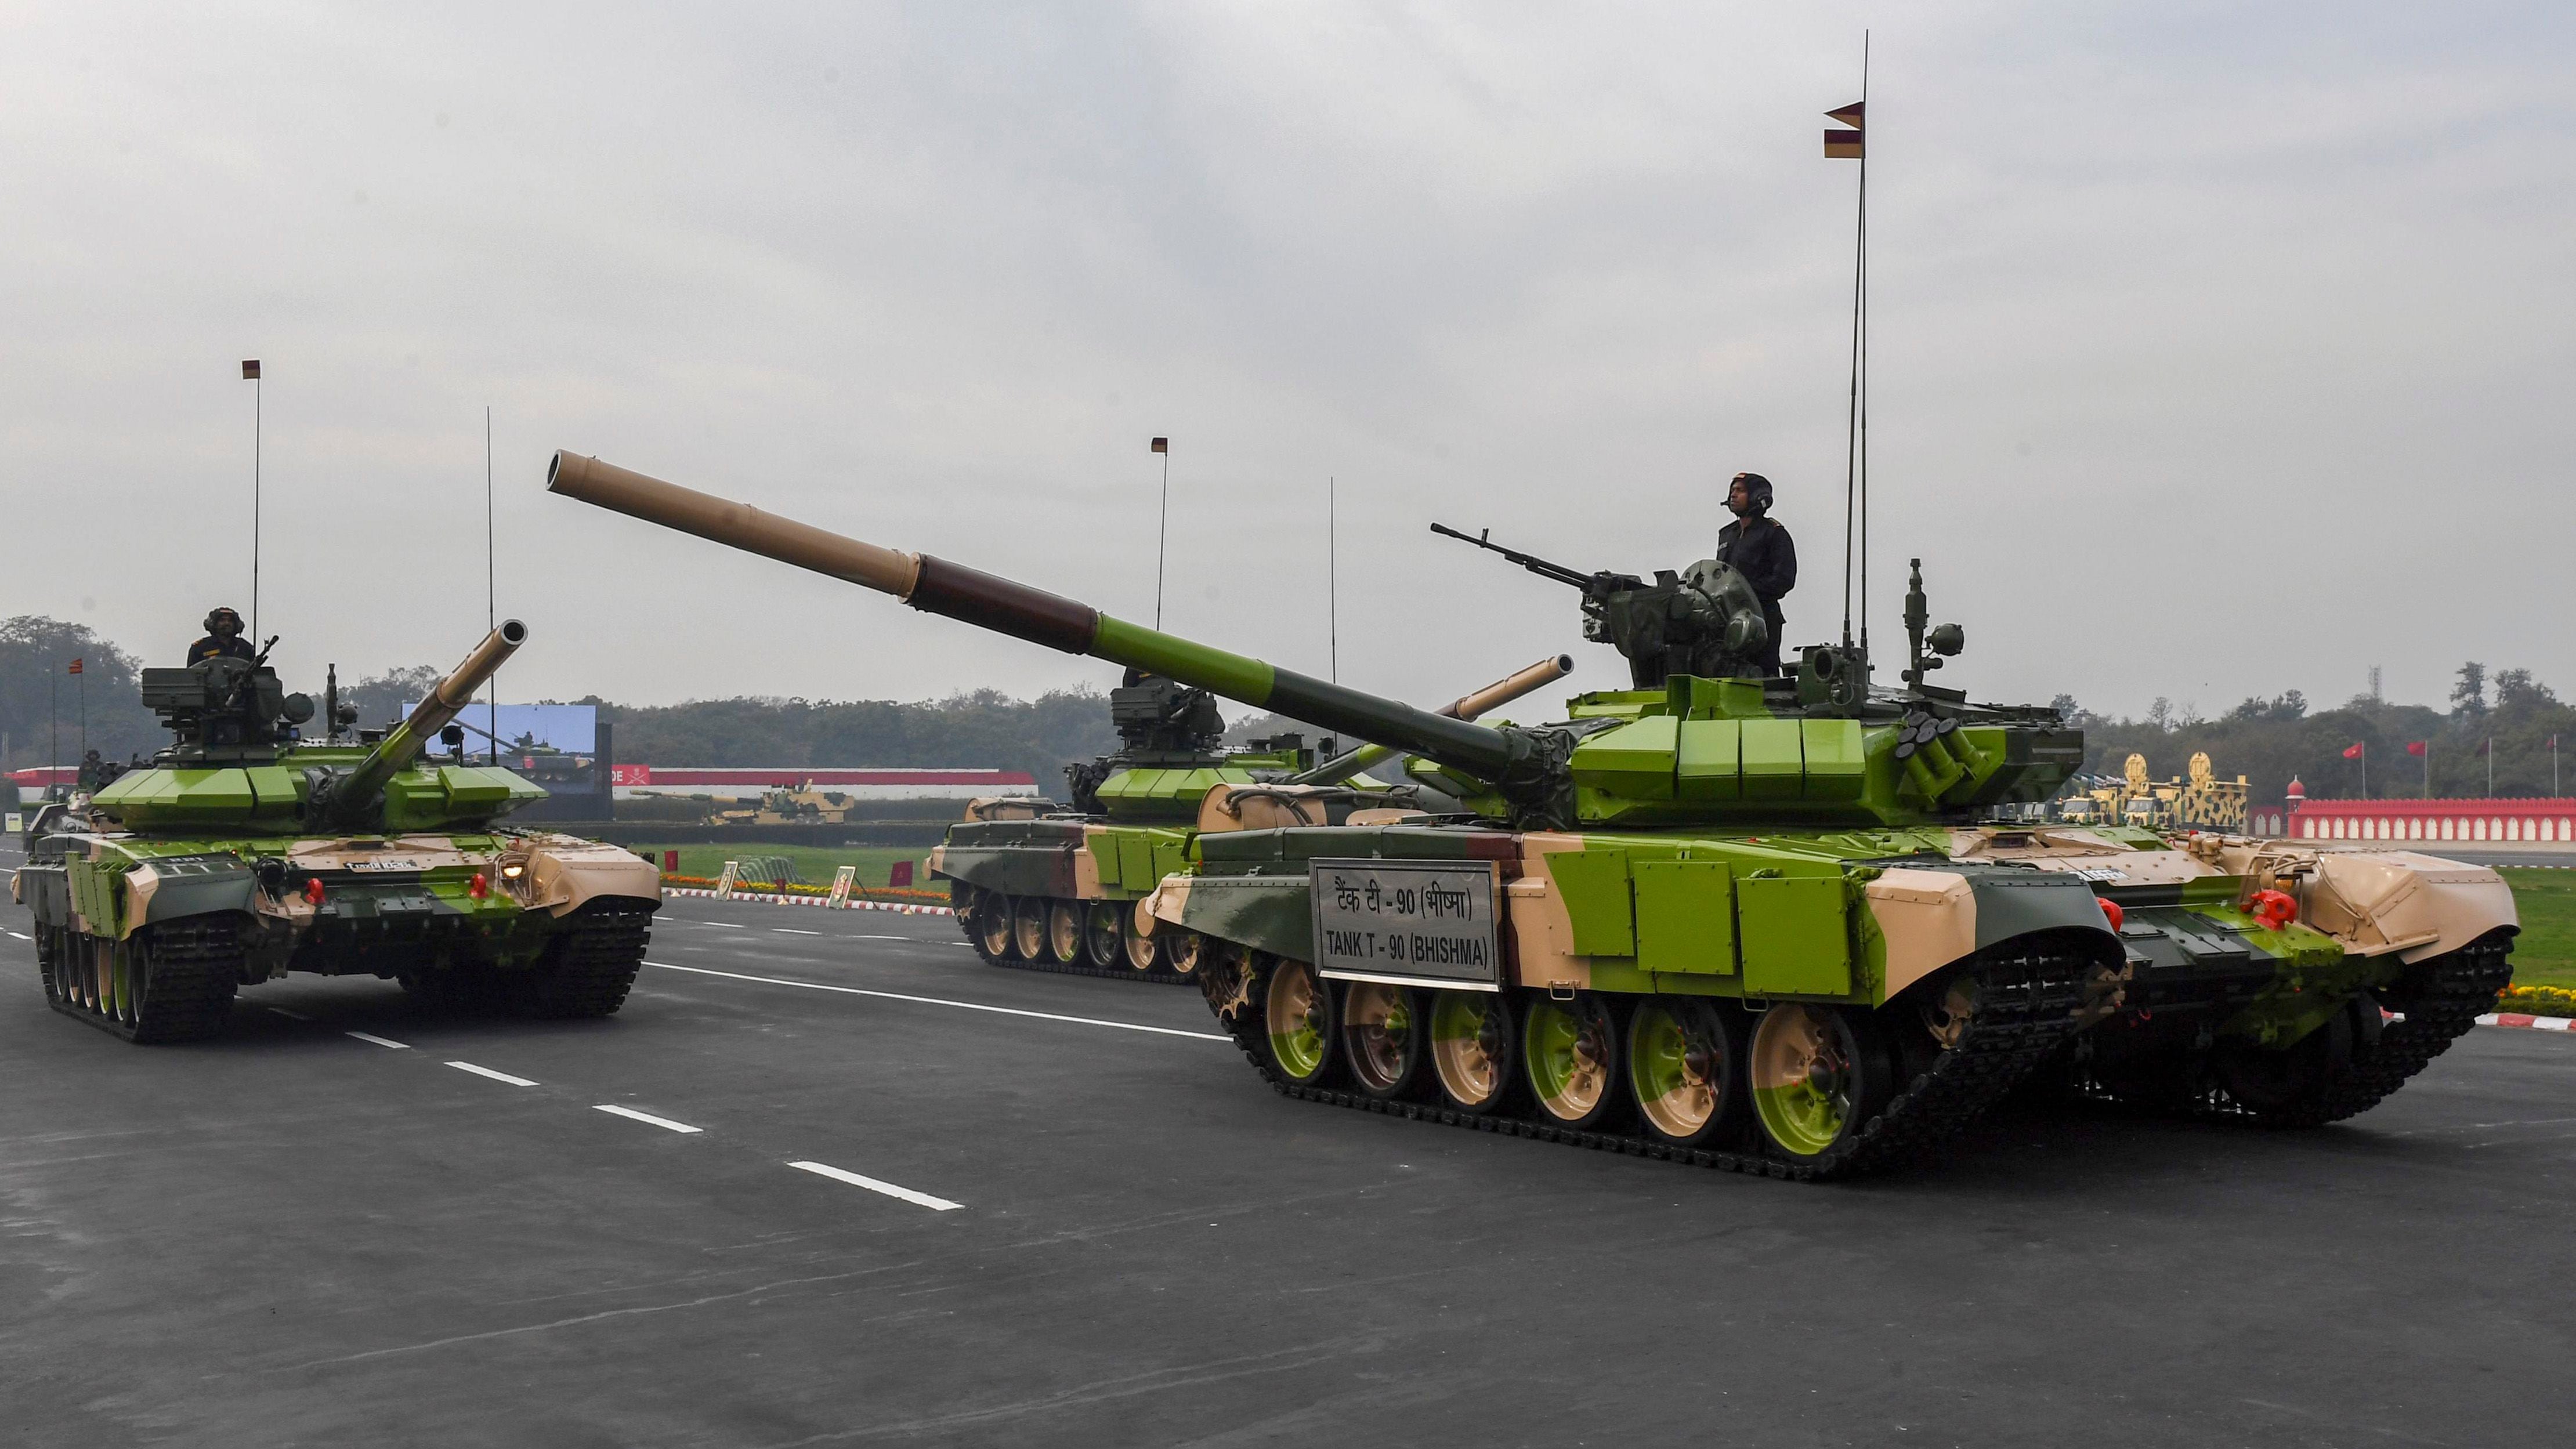 India pays Russia $1.2 billion in technology transfer fees for T-90S tanks